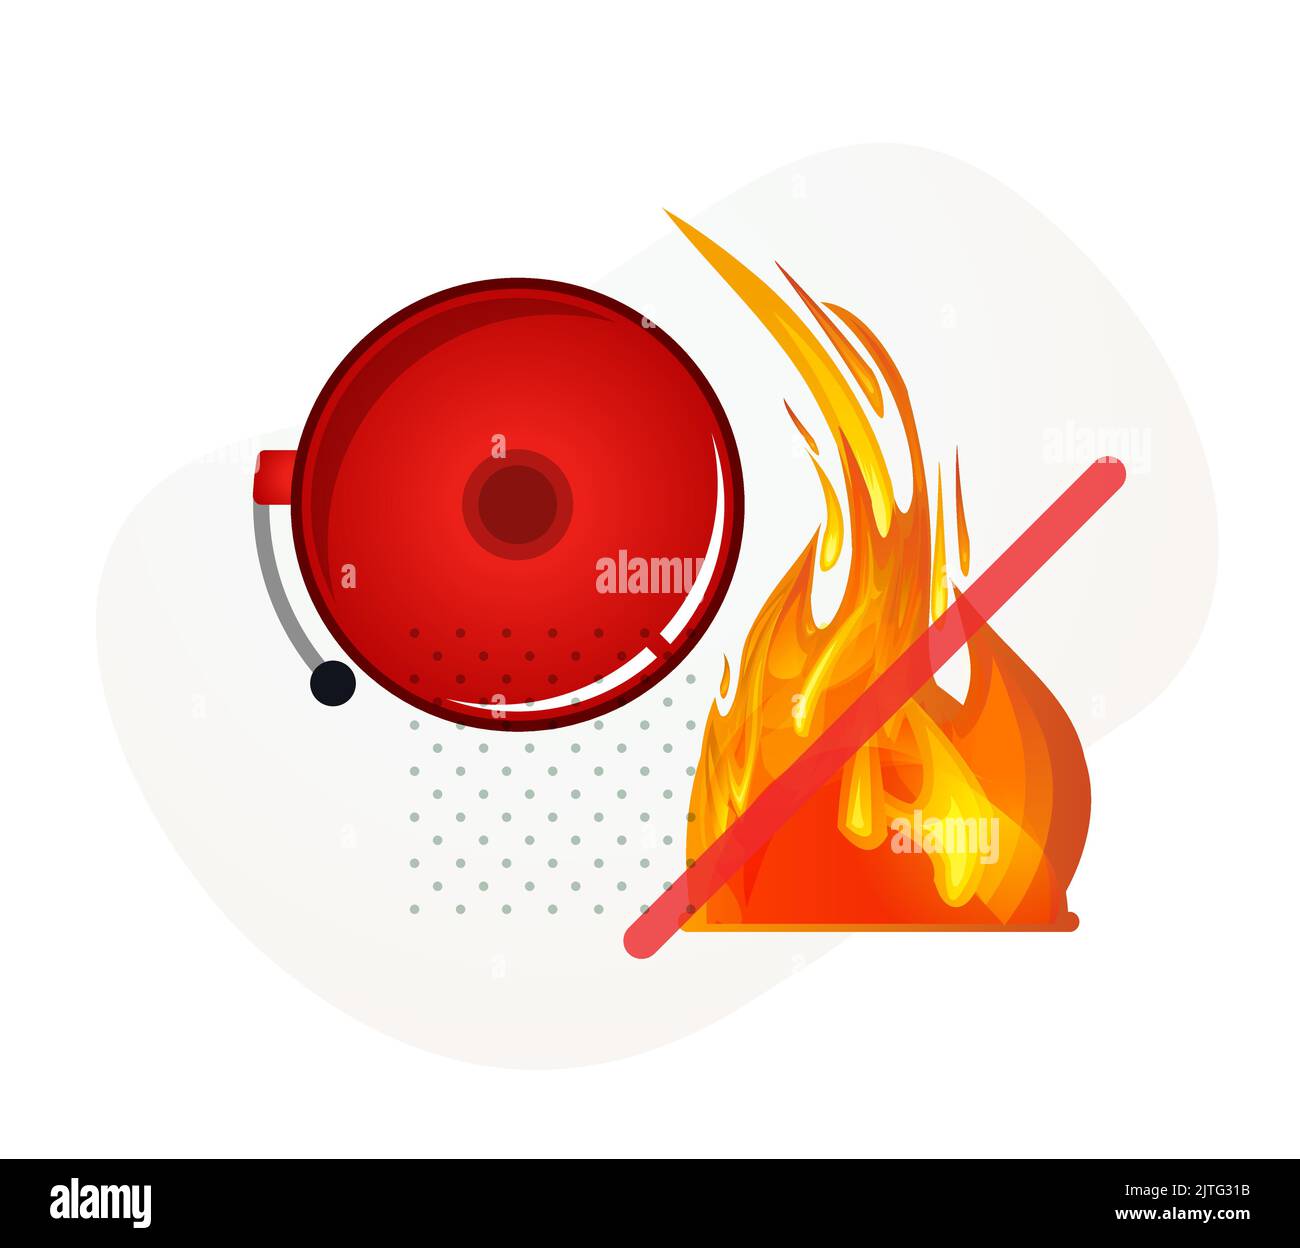 Fire Alarm Bell - Prevent Fire Accidents - Stock Icon as EPS 10 File Stock Vector